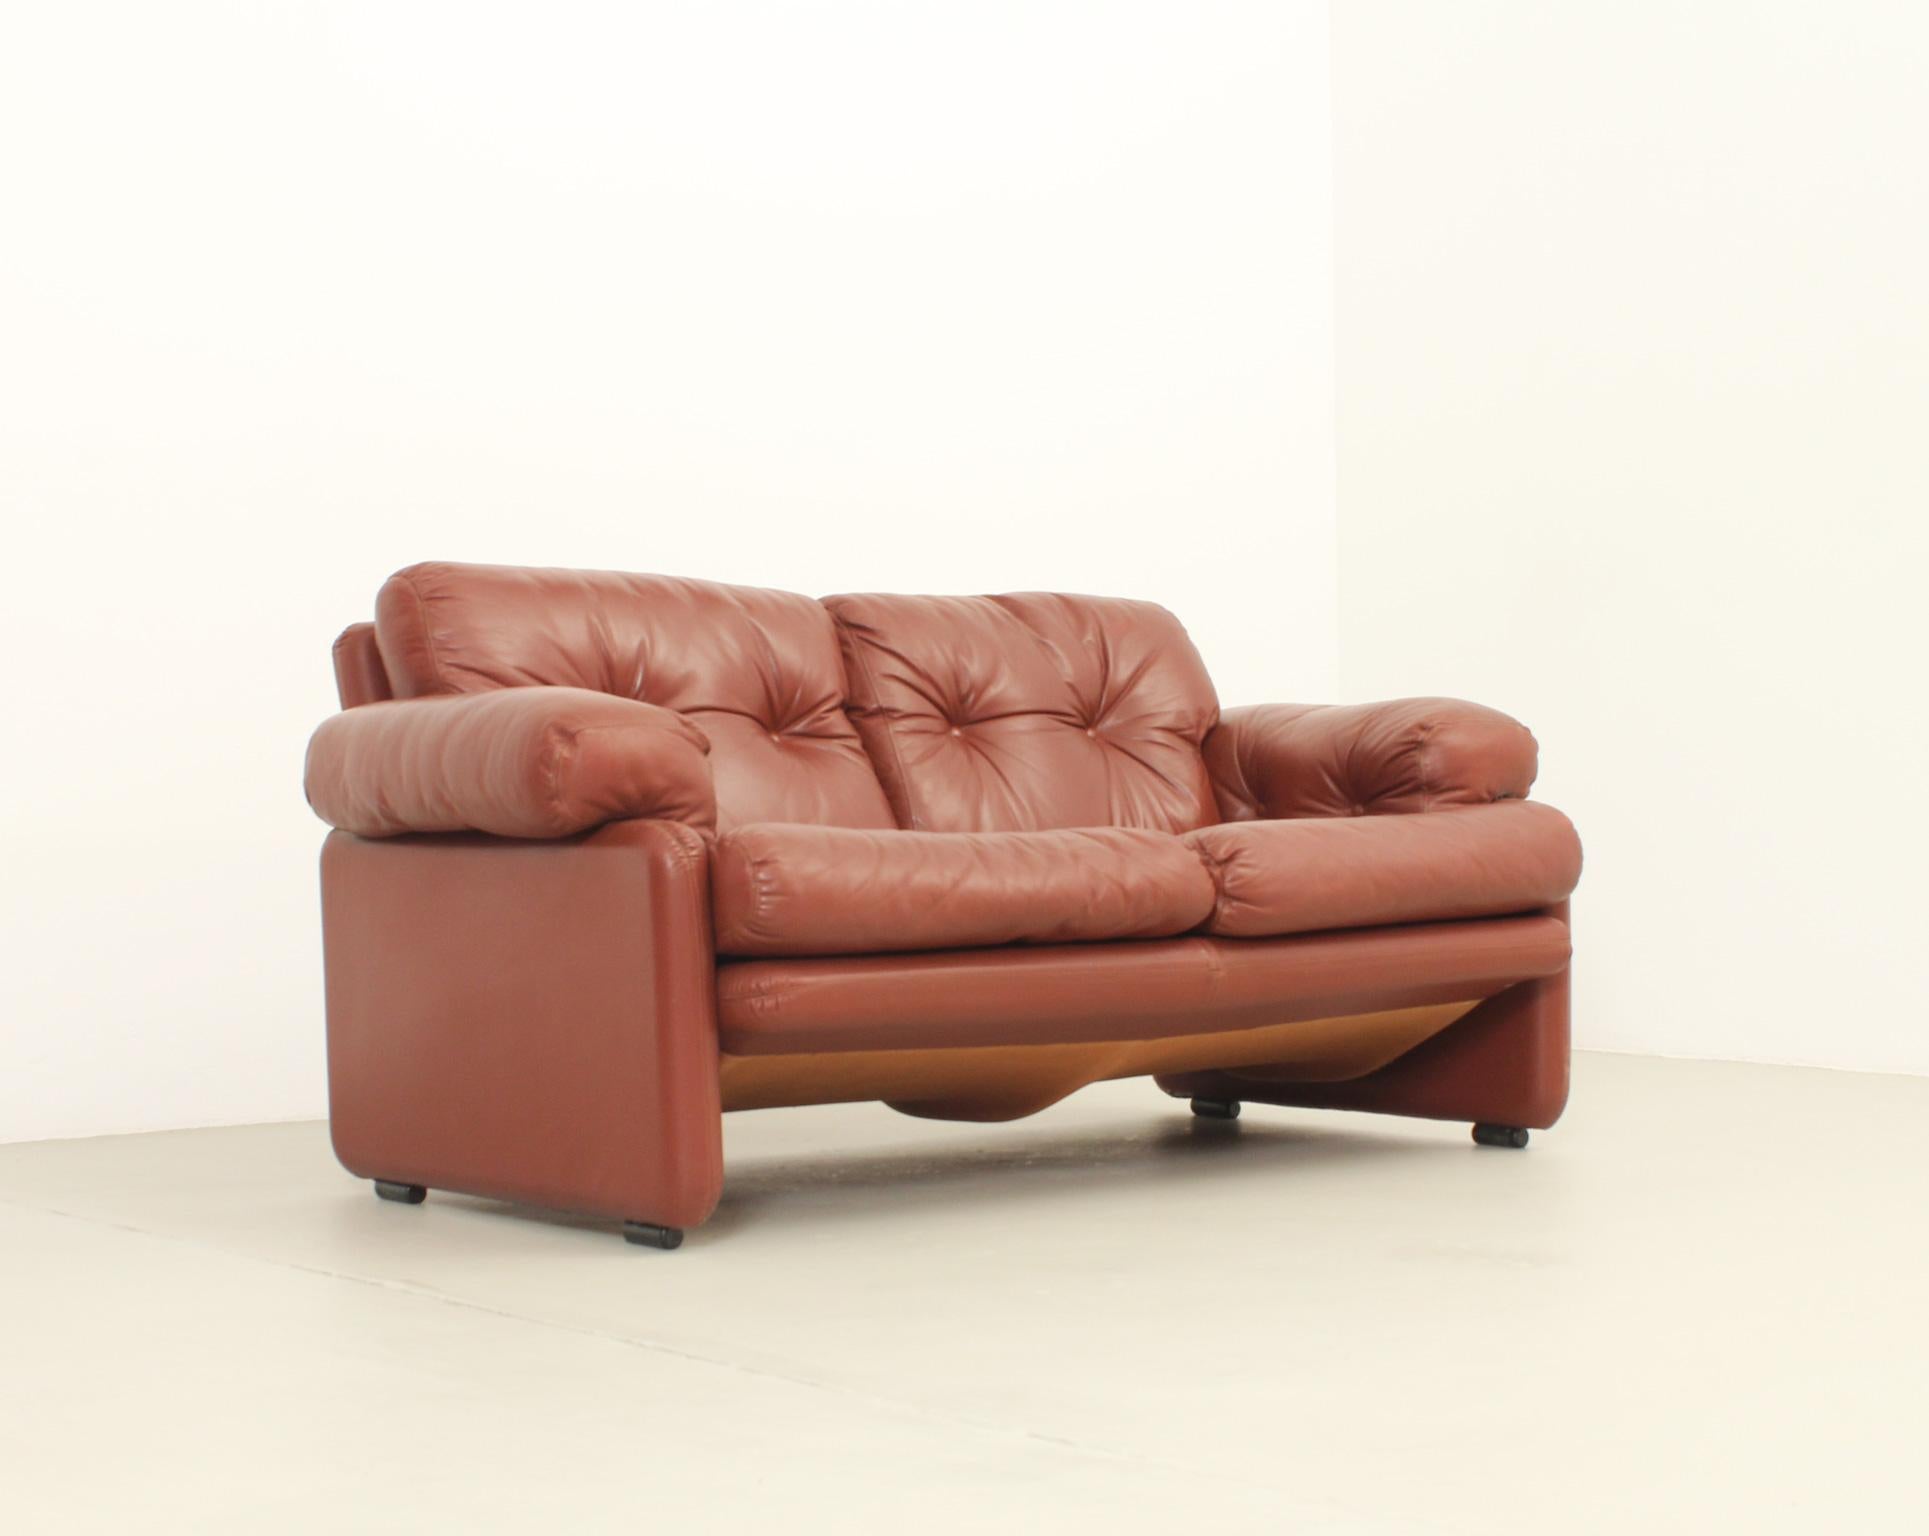 Mid-Century Modern Coronado Two-seater Sofa by Tobia Scarpa in Cognac Leather, 1969 For Sale